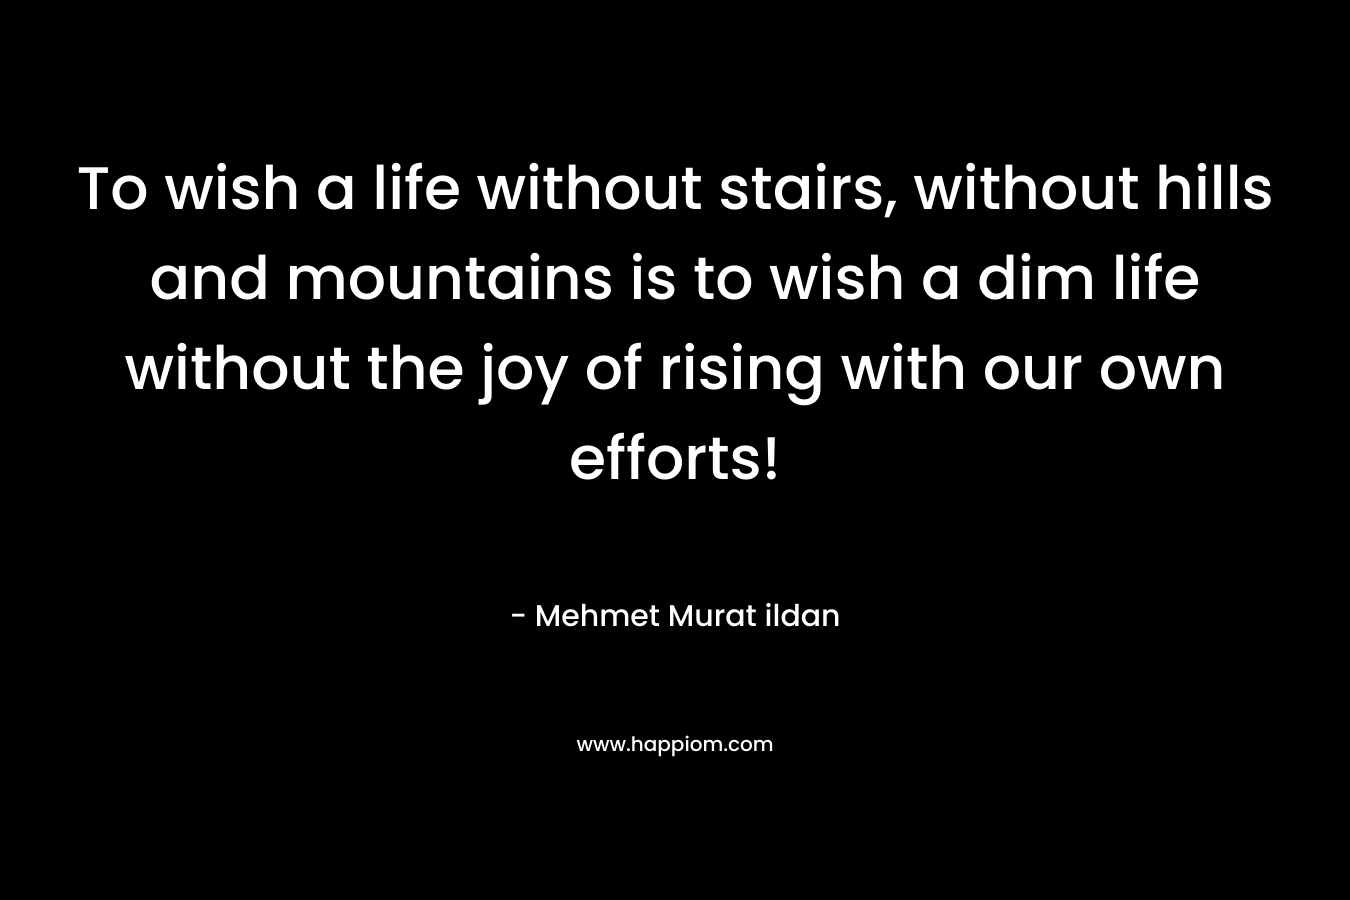 To wish a life without stairs, without hills and mountains is to wish a dim life without the joy of rising with our own efforts! – Mehmet Murat ildan